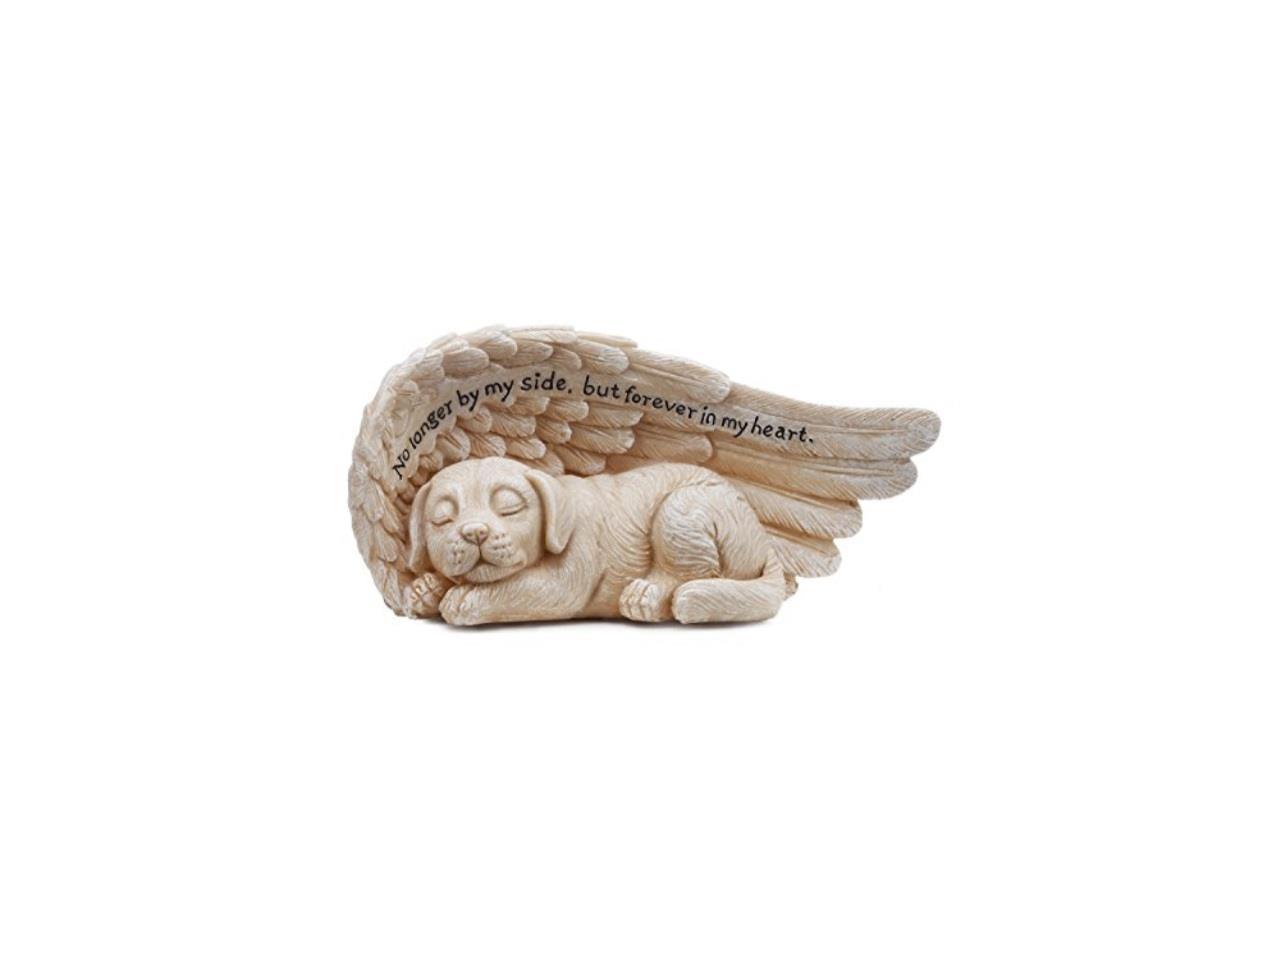 Napco 11146 Small Sleeping Dog in Angels Wing Garden Statue with Inscription 8 x 4 